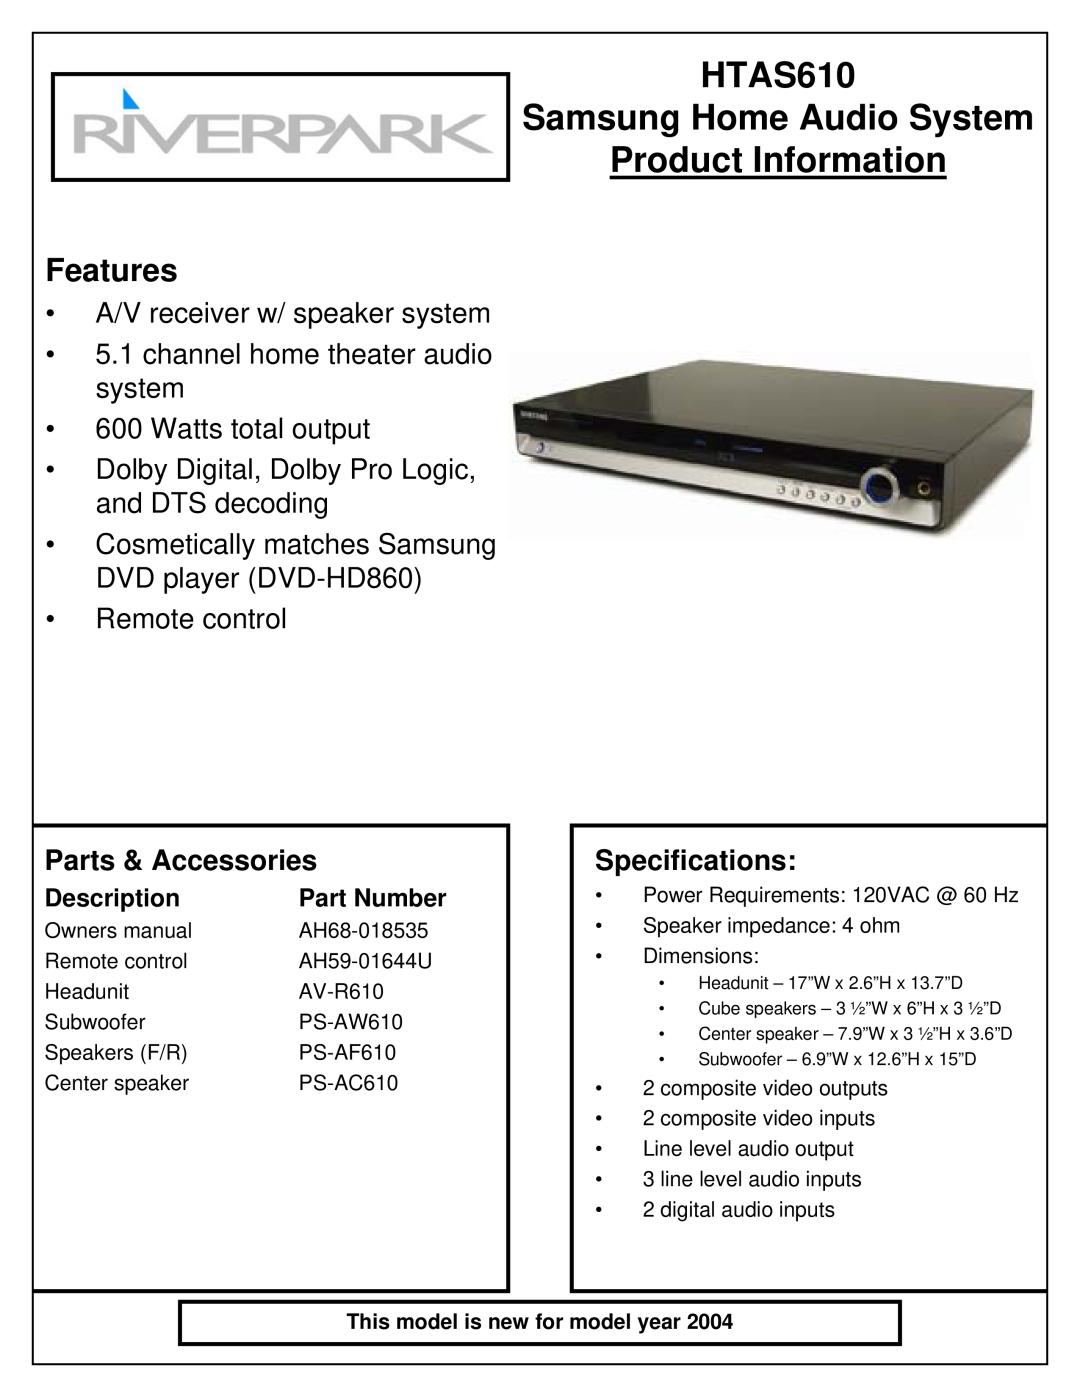 Samsung HT-AS610 owner manual HTAS610 Samsung Home Audio System, Product Information, Features, Watts total output 